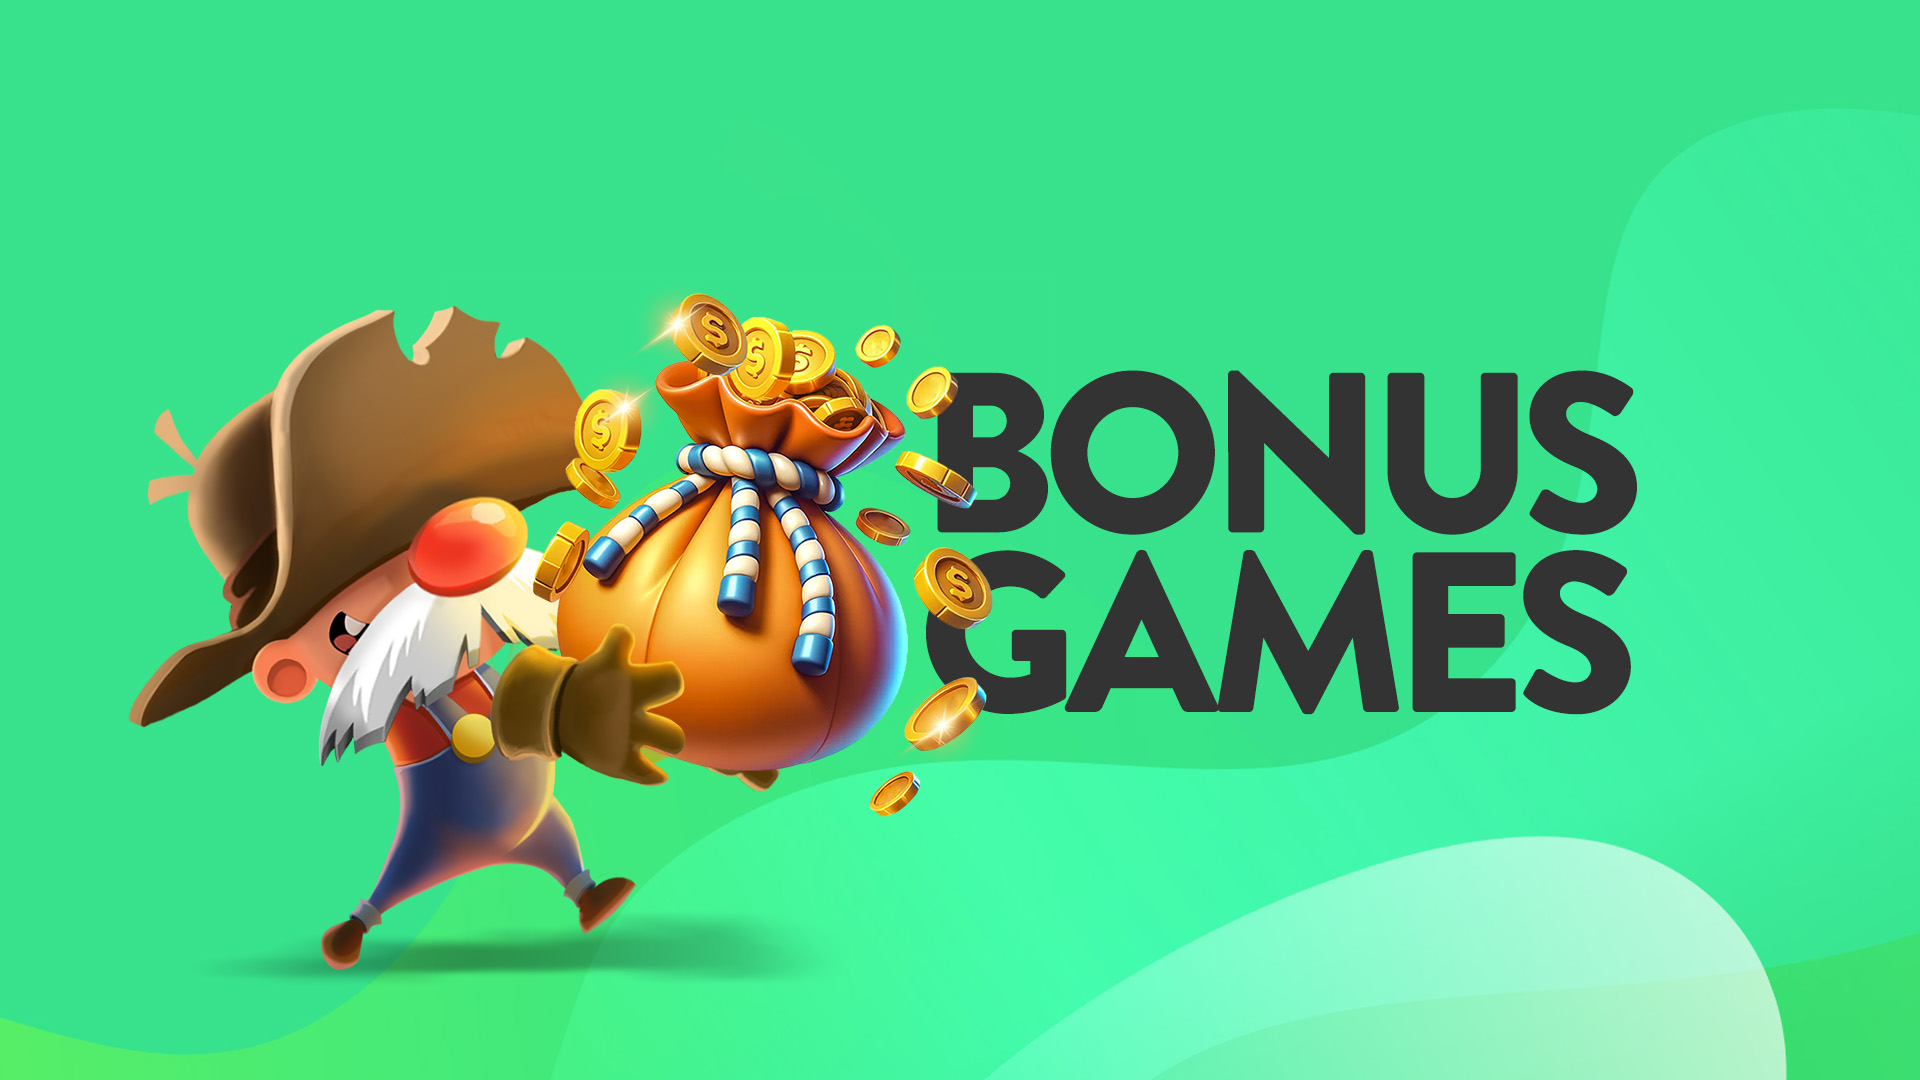 A cartoon prospector with a big bushy mustache carries a gold sack with gold coins tumbling out of the top. Text says ‘Bonus Games’ next to it, and it’s all on a mint green background.